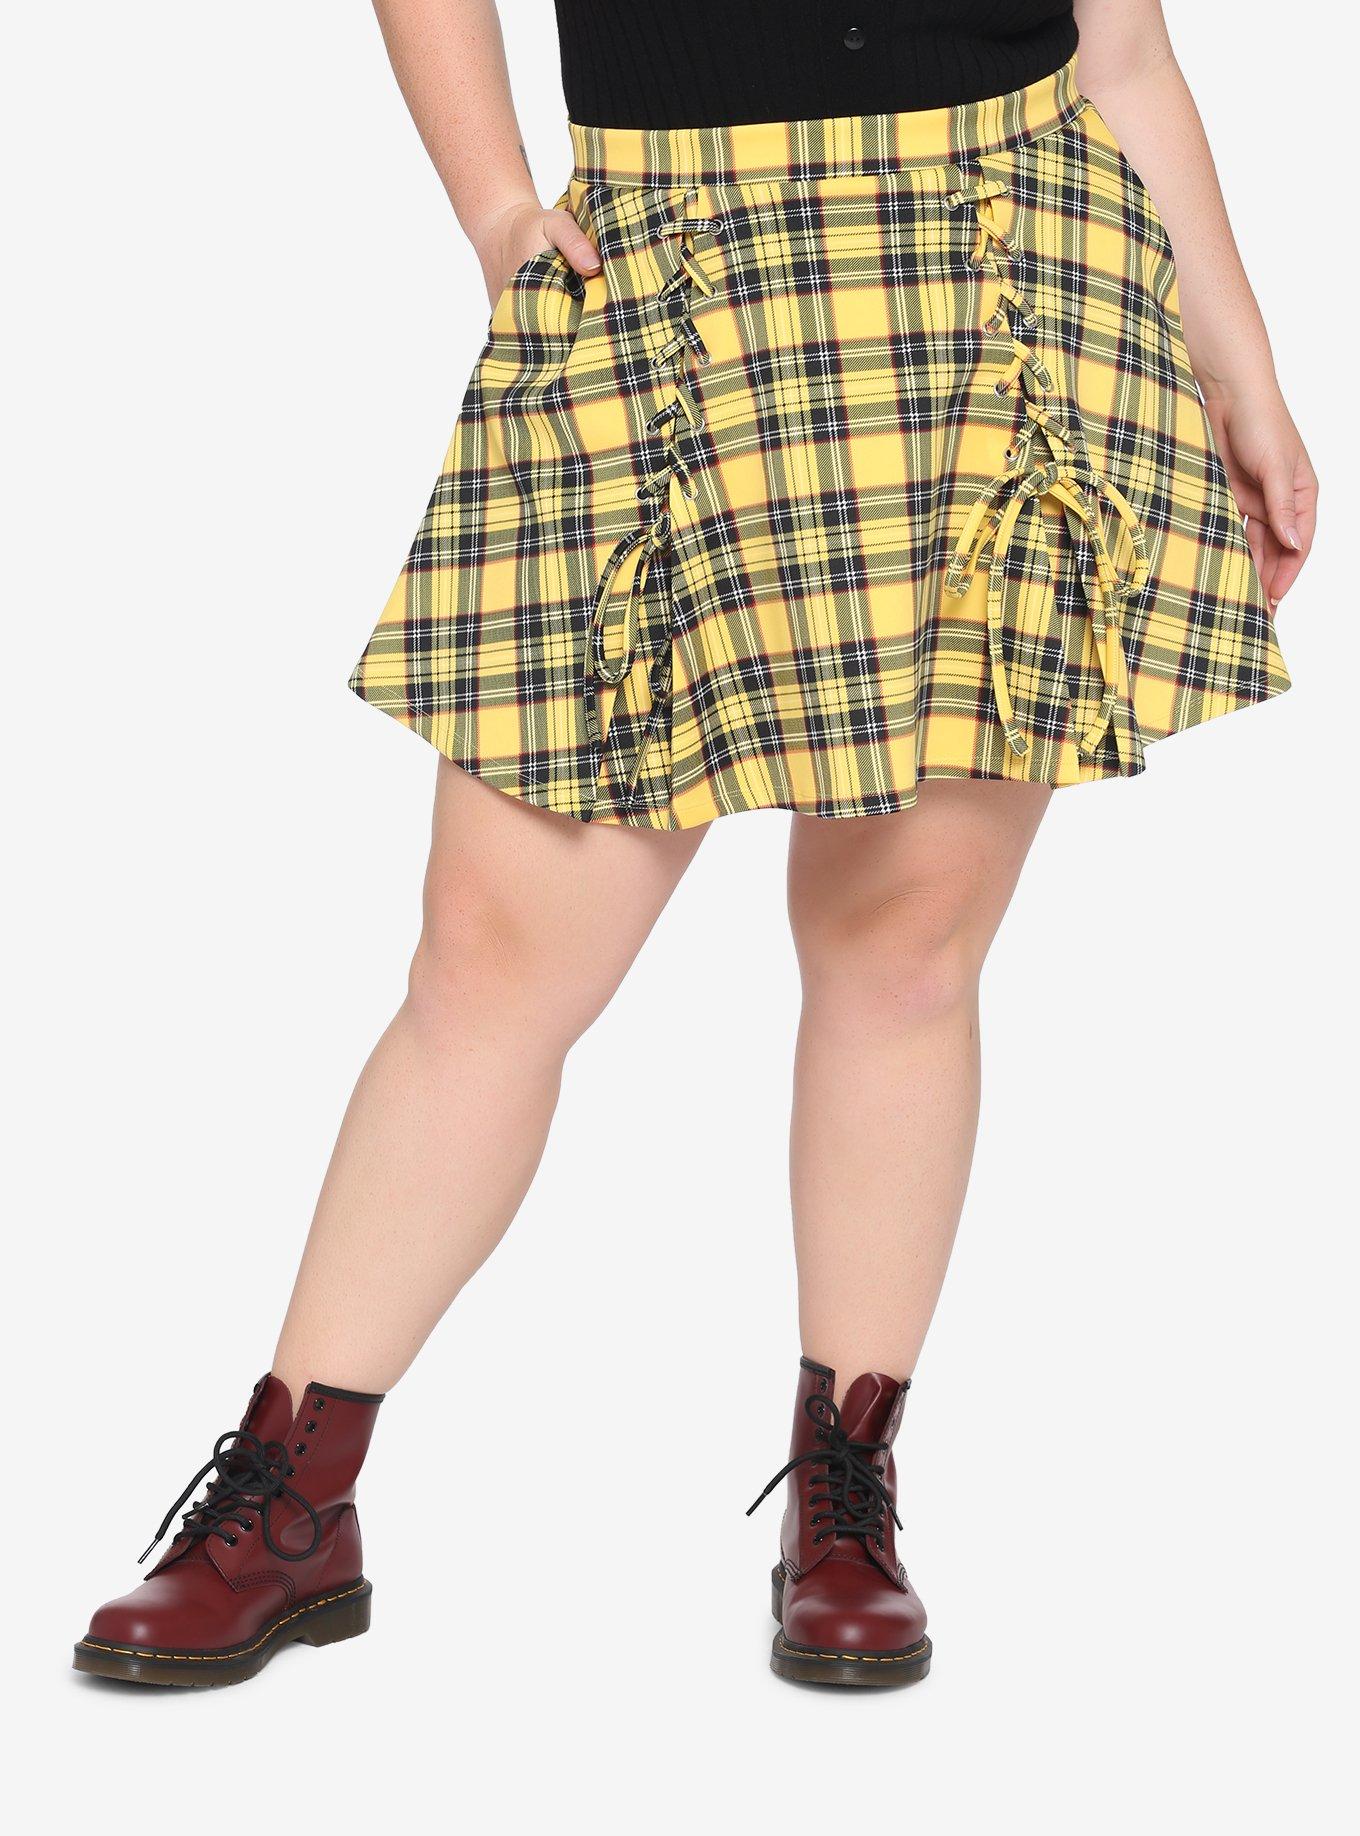 Yellow Plaid Lace-Up Skirt Plus Size, PLAID - YELLOW, hi-res